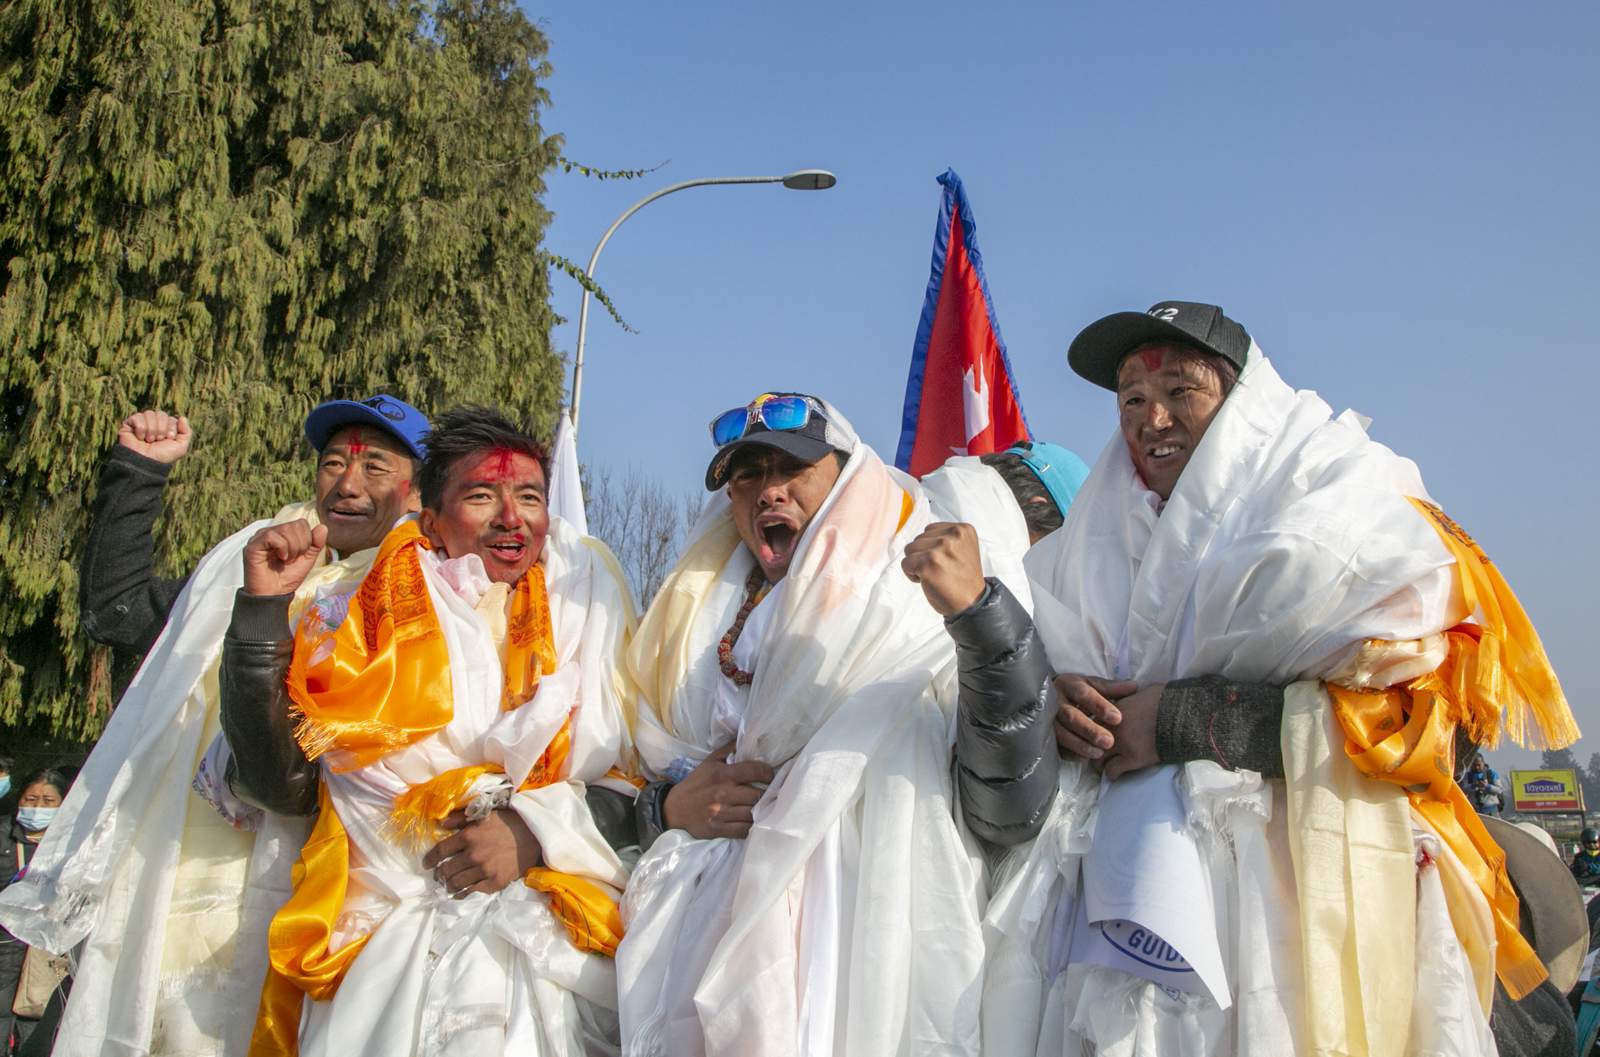 Nepal team that scaled K2 receive hero's welcome back home